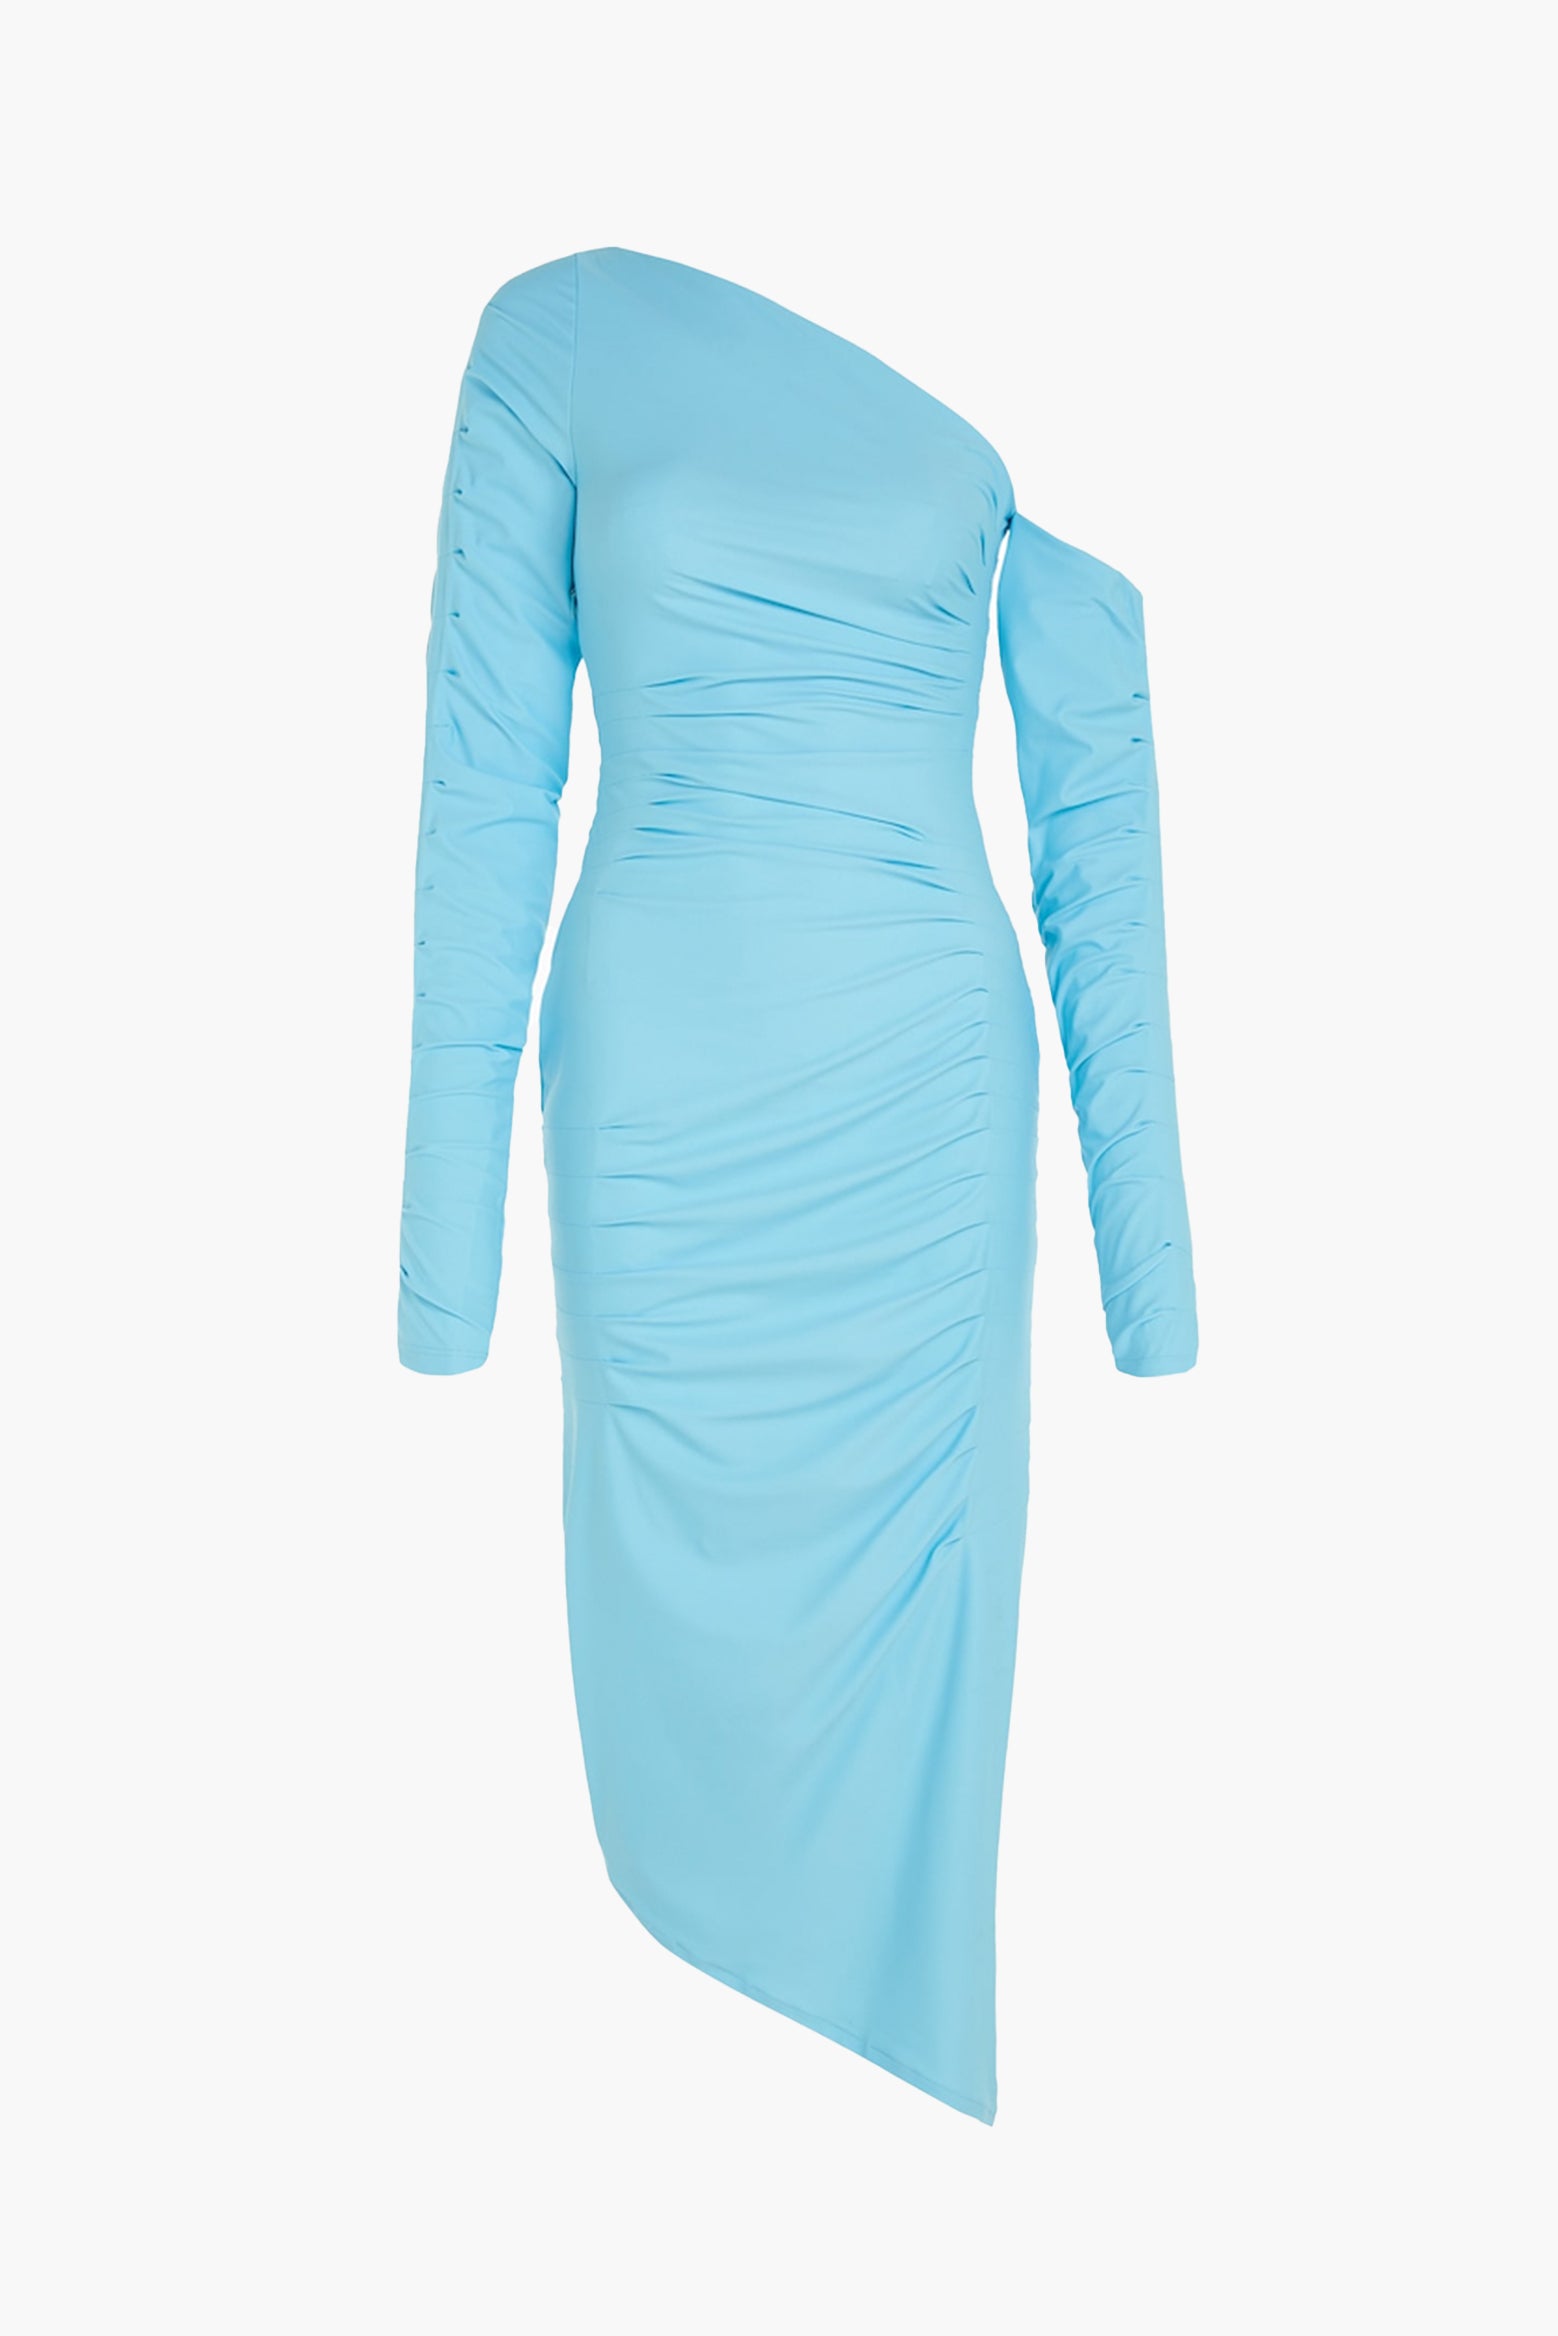 Gauge81 Sena Midi Dress in Gust available at The New Trend Australia. 